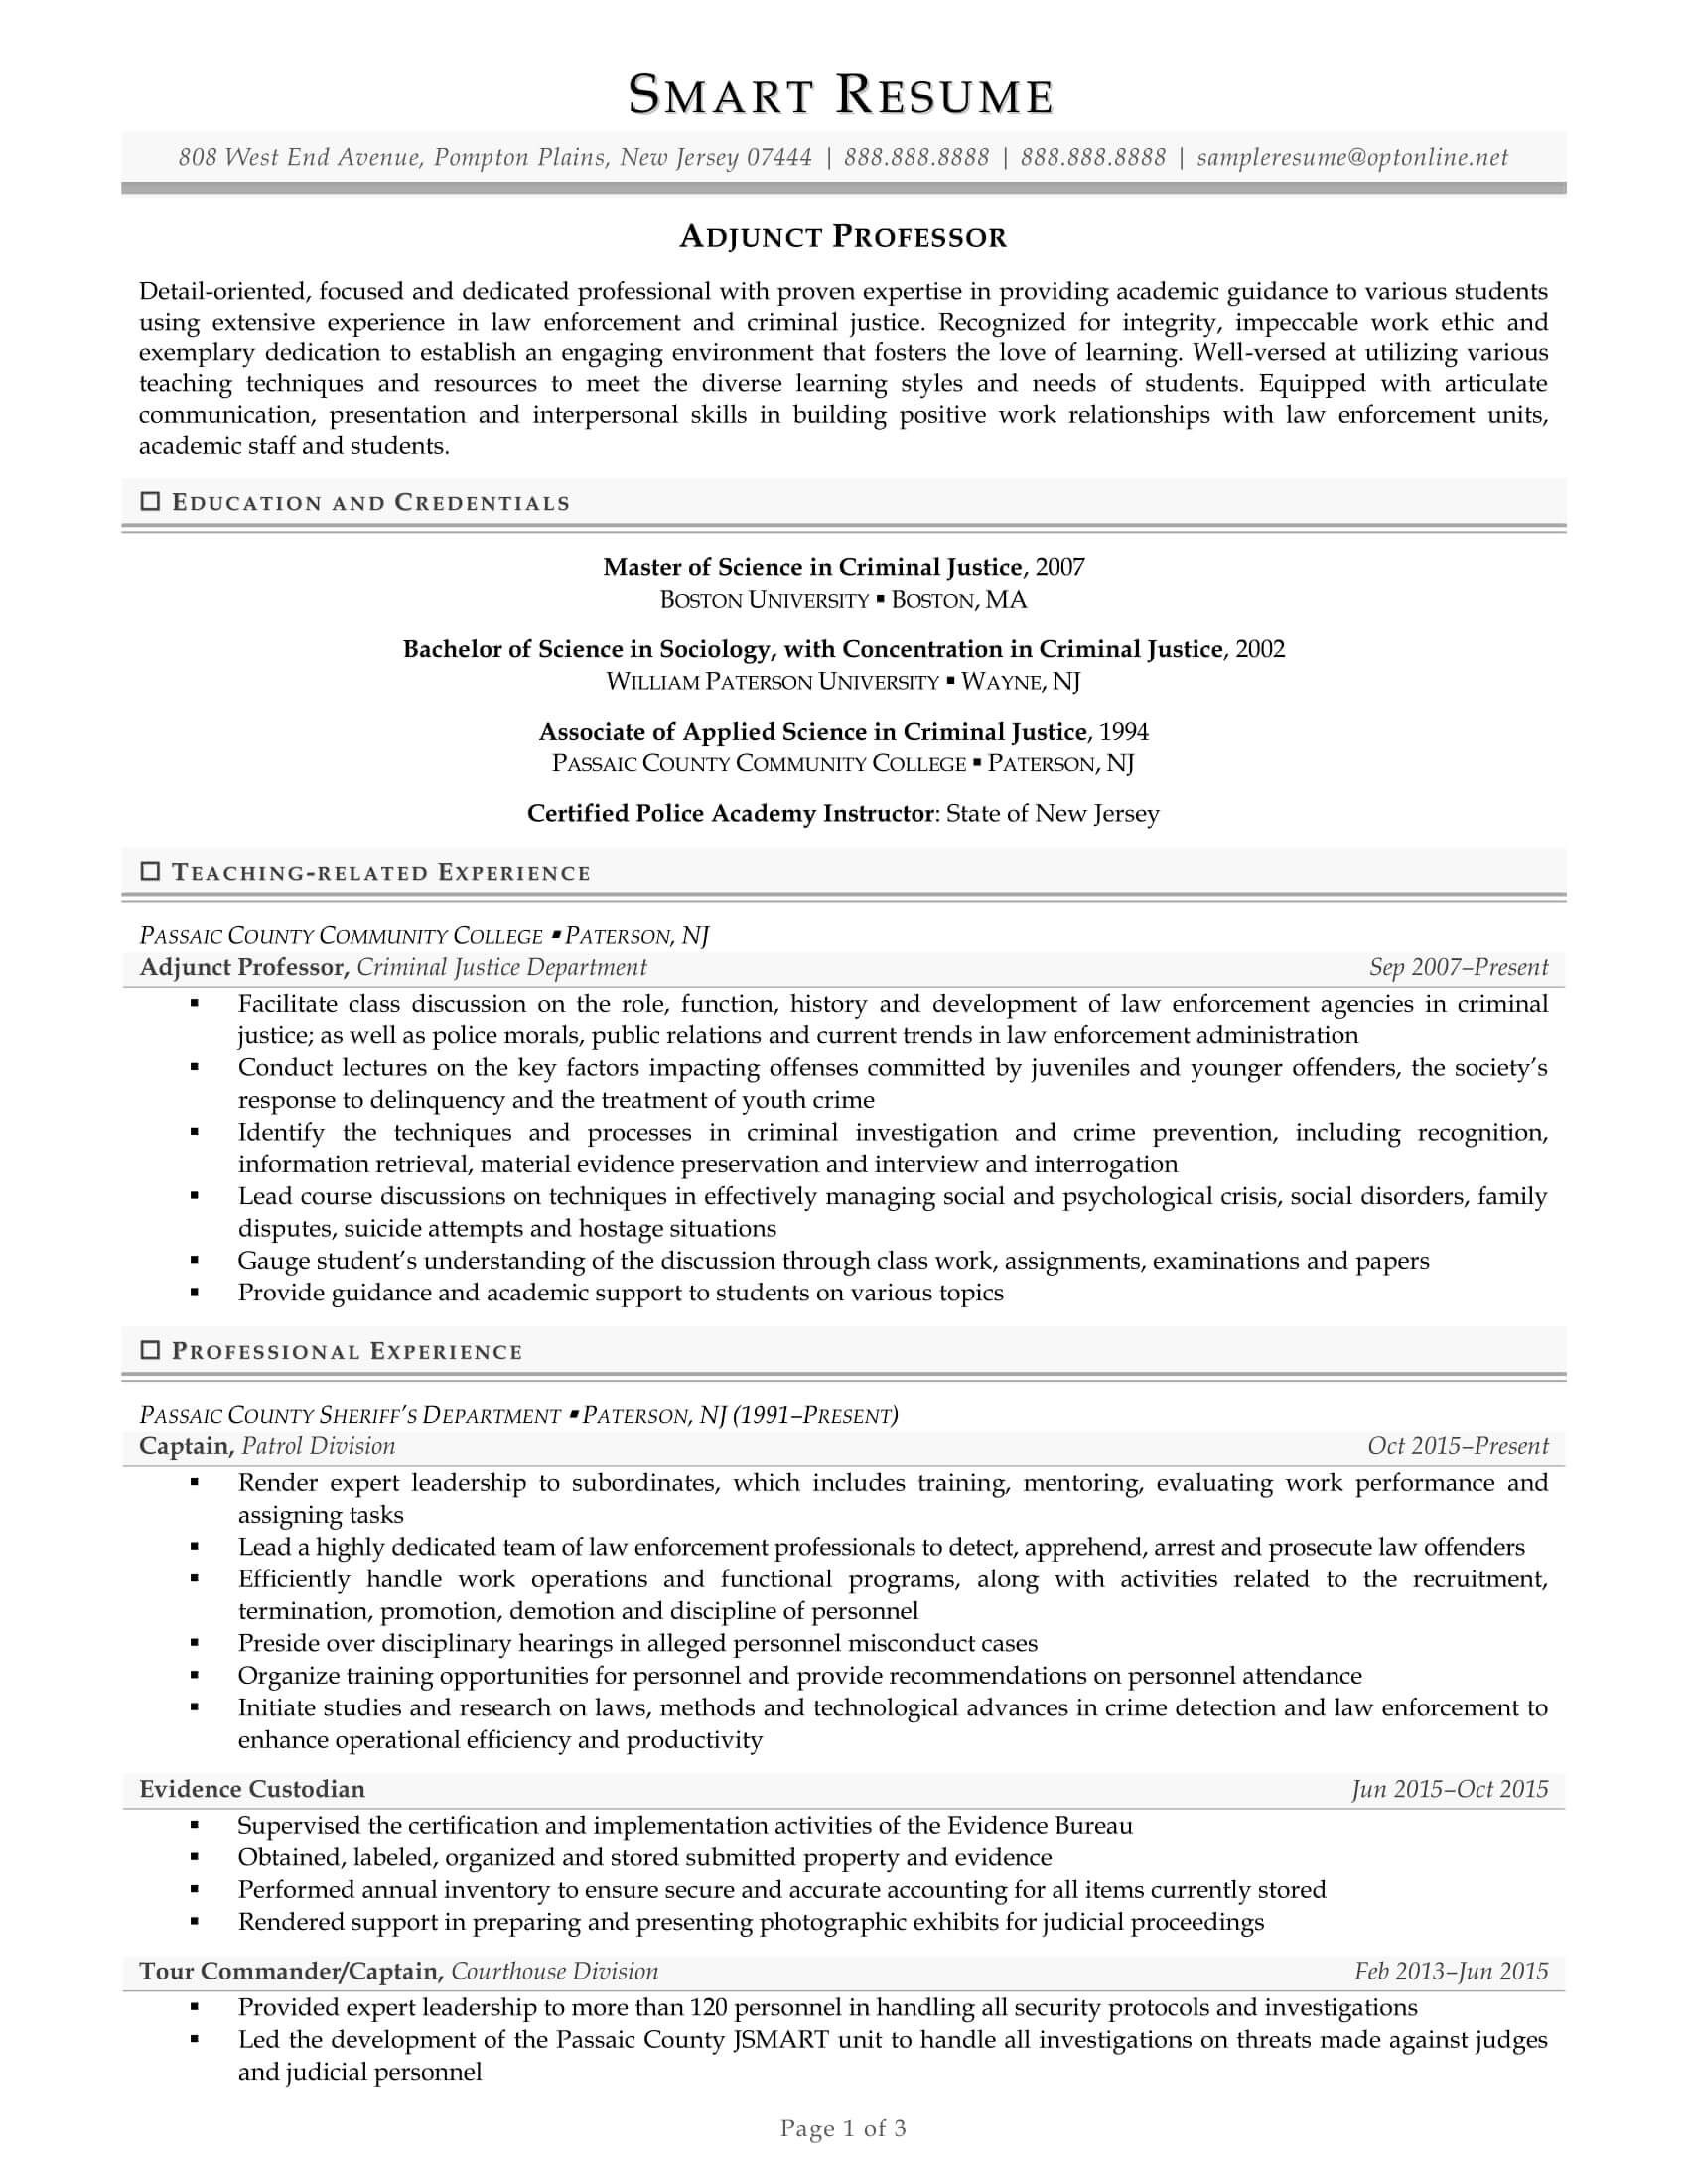 Sample Resume for Adjunct Faculty Position Resume Examples Smart Resume Services